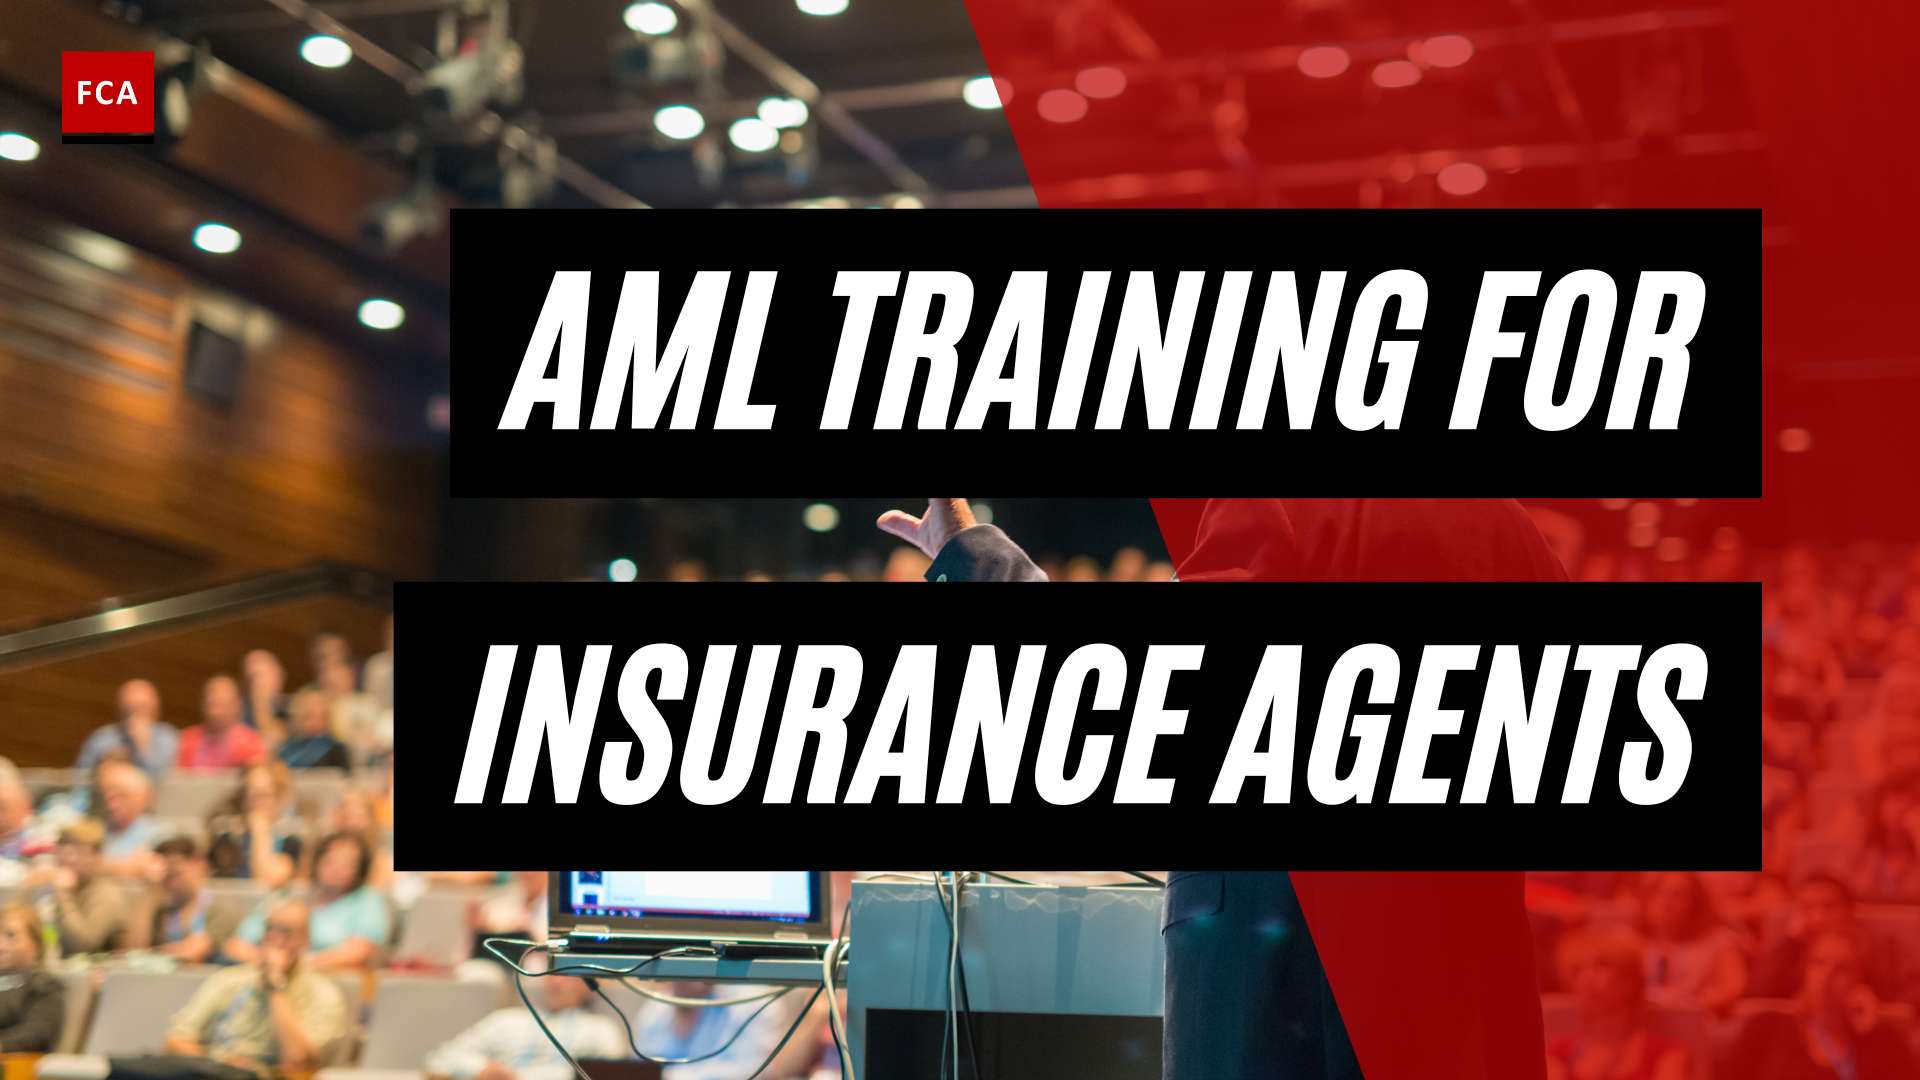 The Power Of Knowledge: Aml Training For Insurance Agents Uncovered